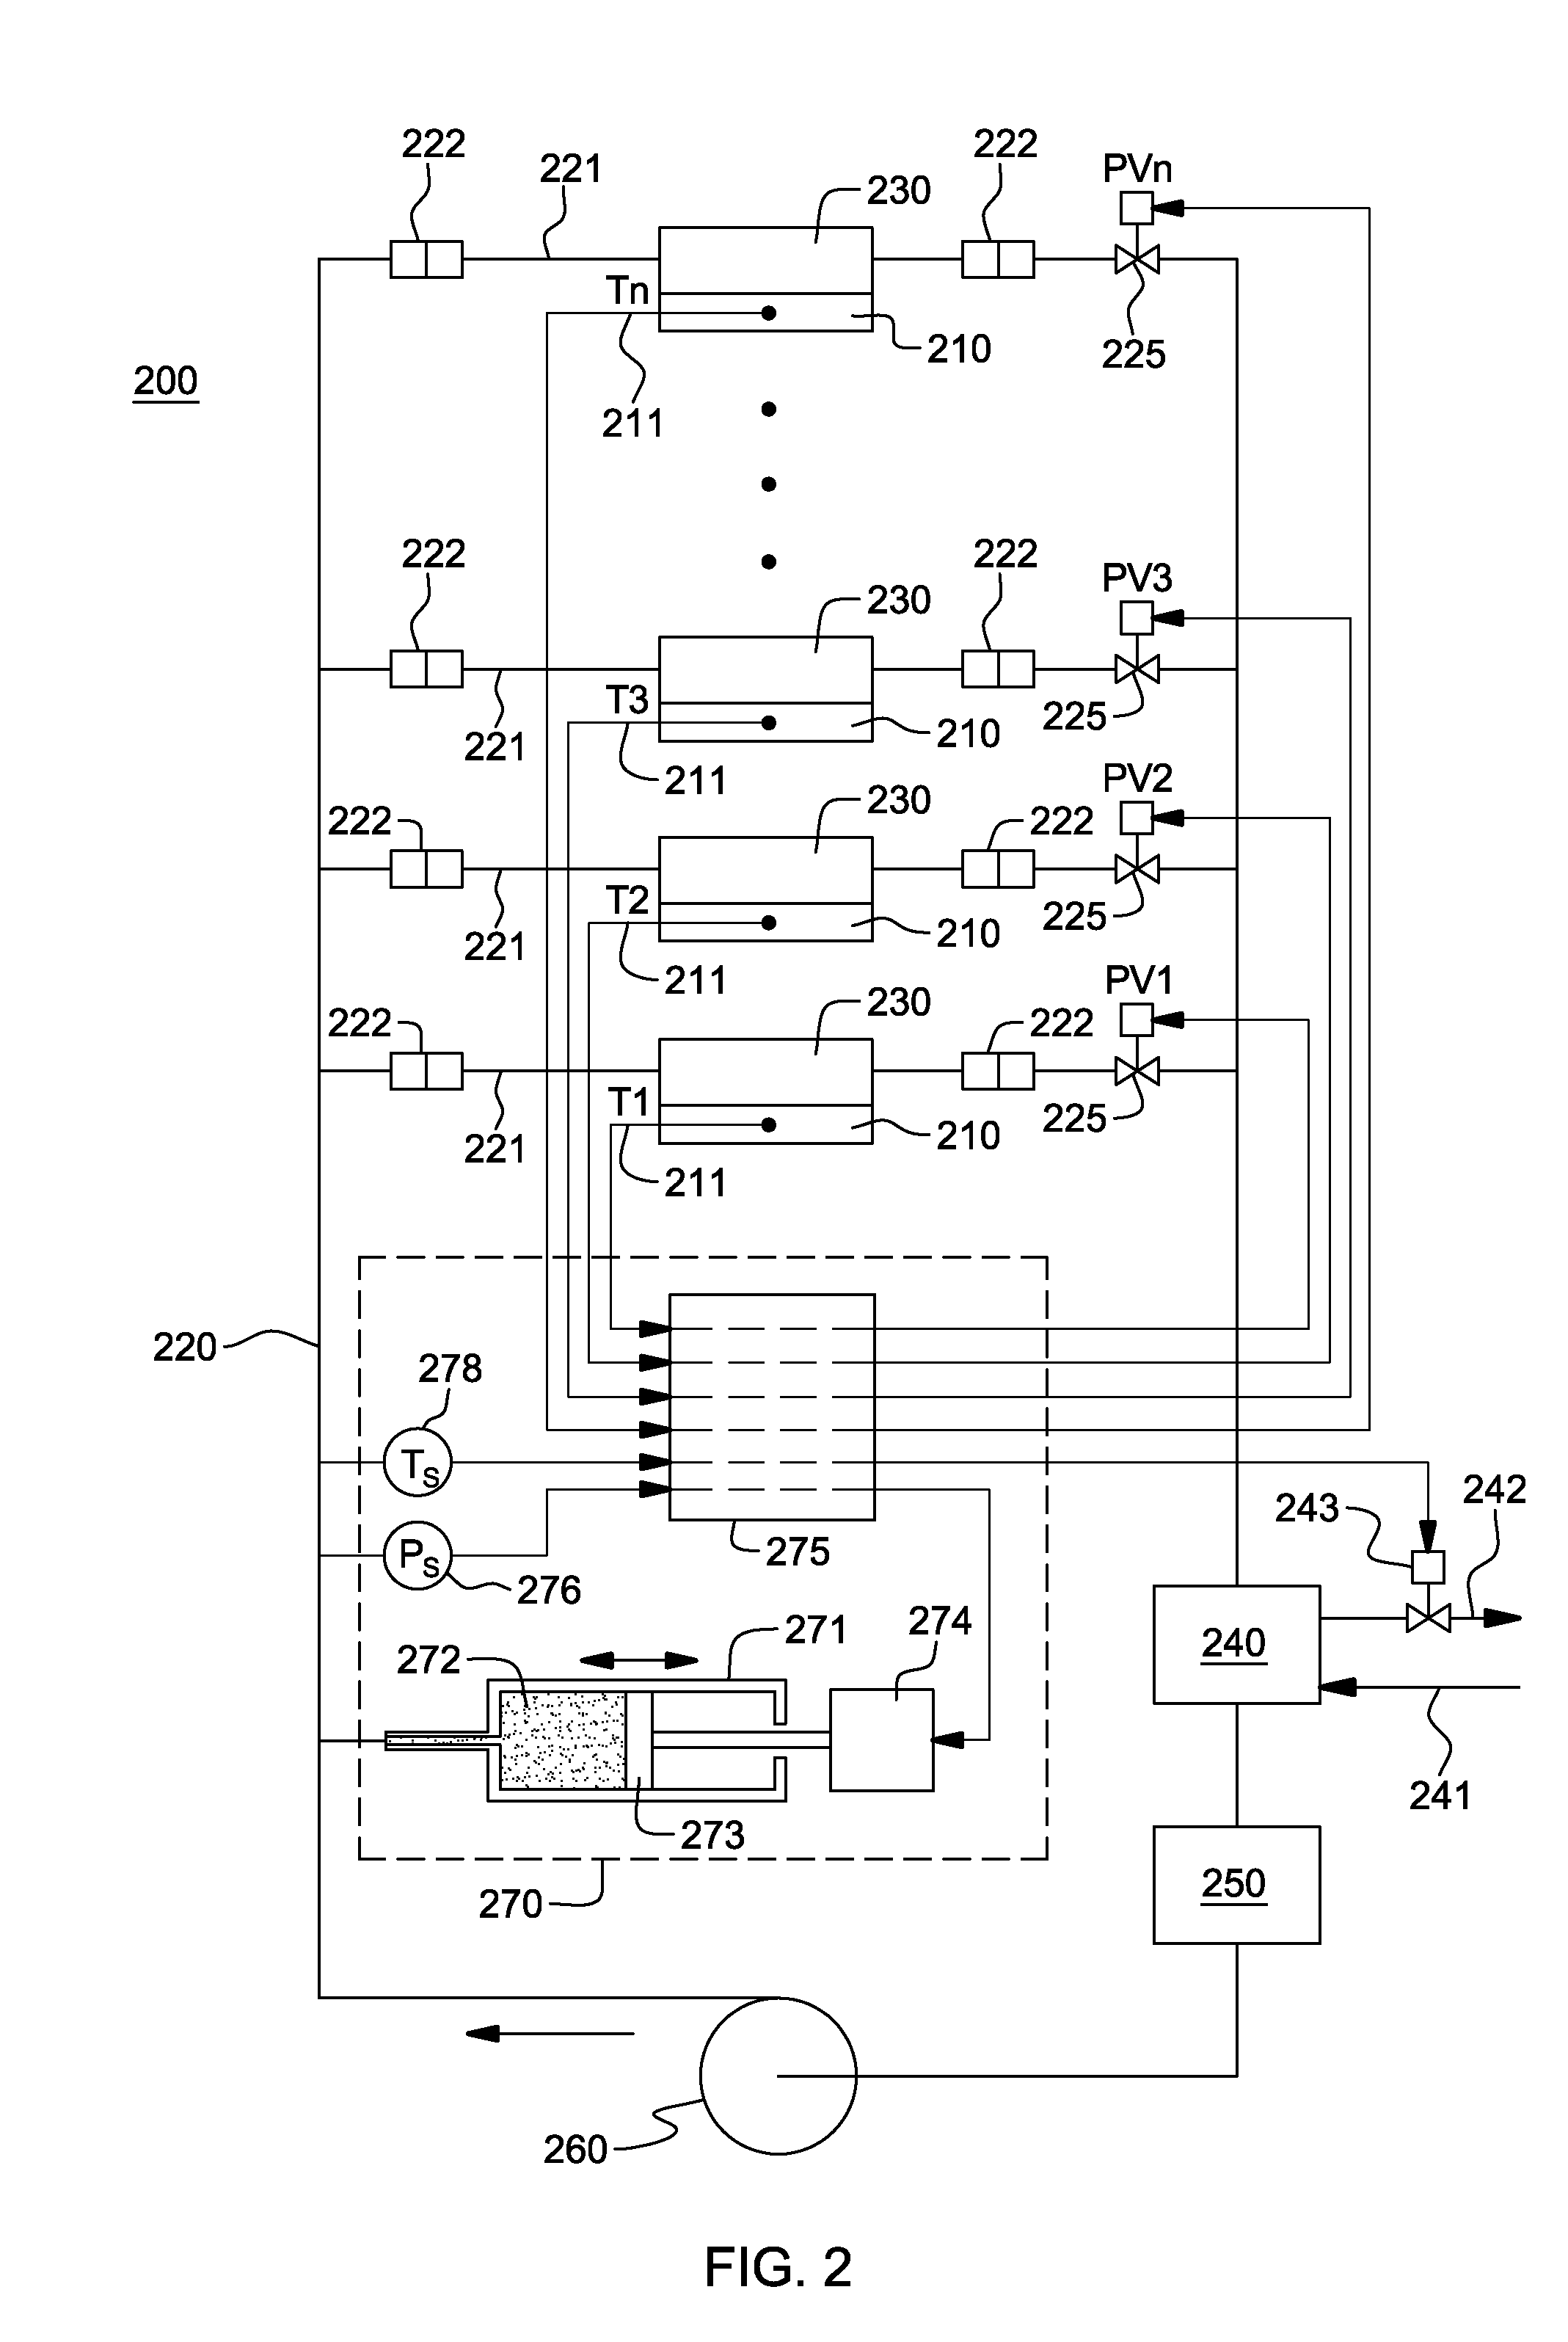 Control of system coolant to facilitate two-phase heat transfer in a multi-evaporator cooling system